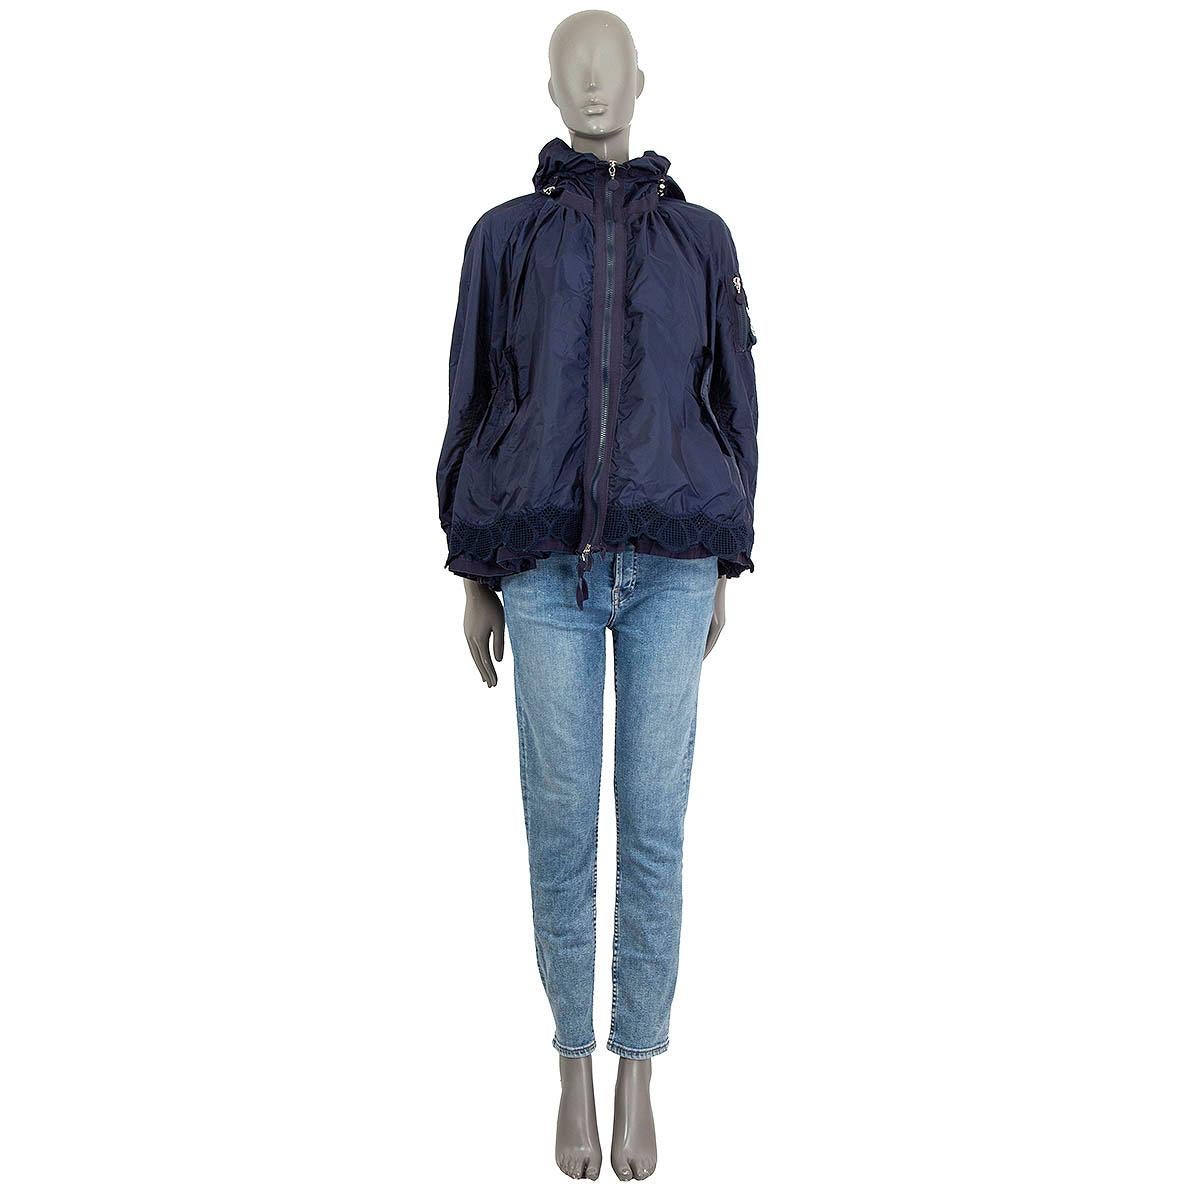 100% authentic Moncler flared hooded jacket in navy blue polyamide (100%). Embellished with a broderie anglaise hemline. Features two buttoned flap pockets on the front, one buttoned pocket and a zip pocket at the sleeve. Opens with two zippers on